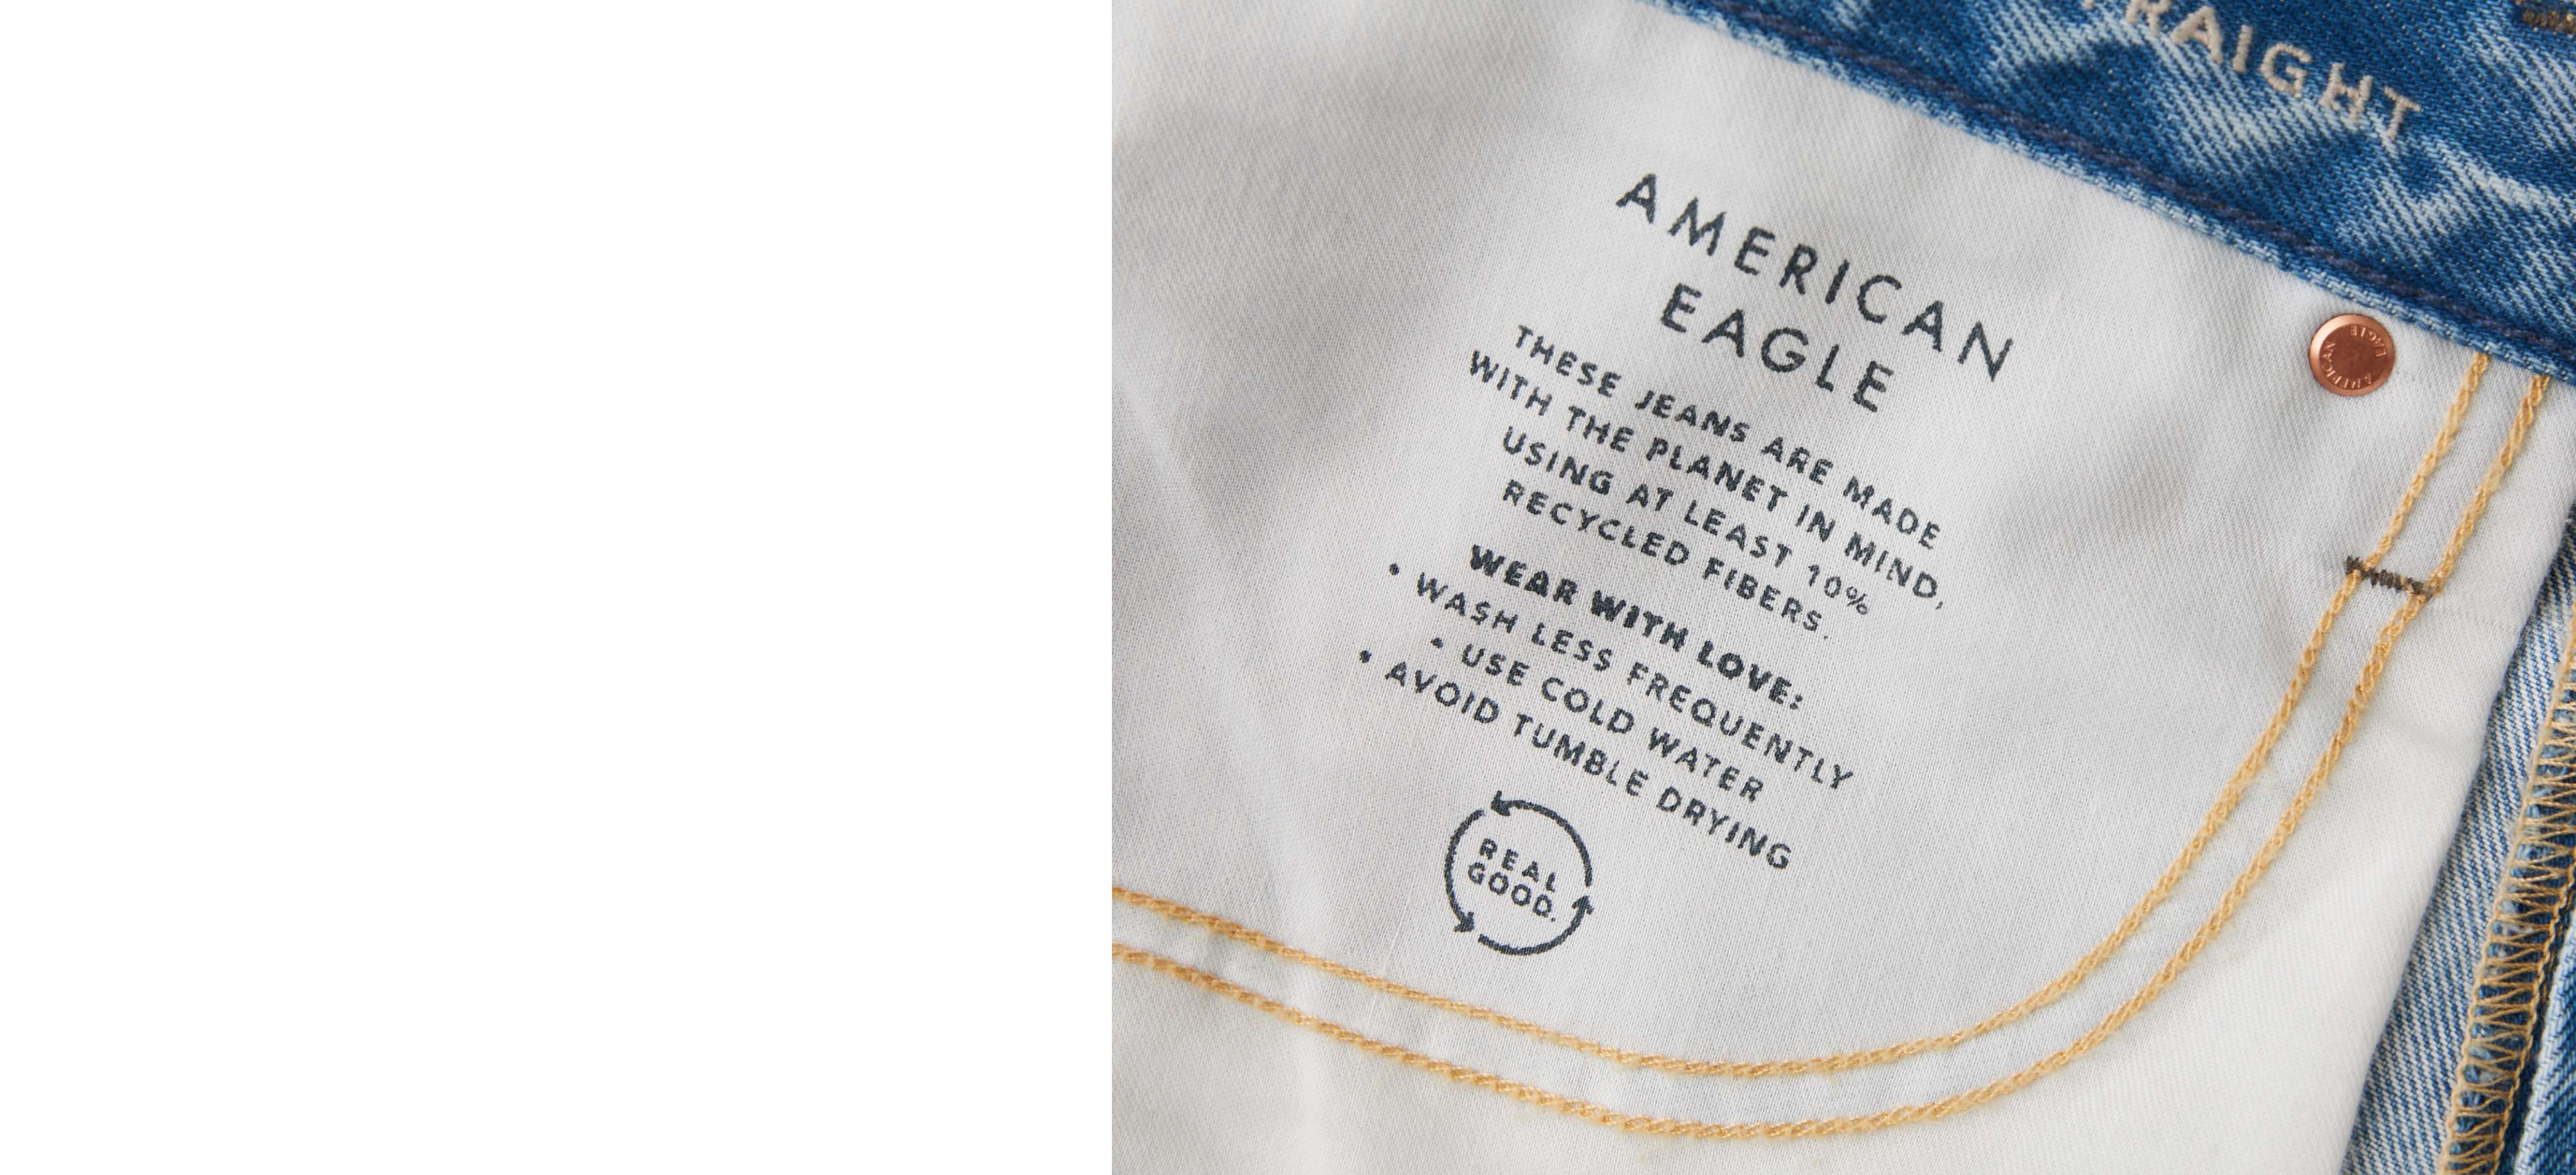 Buy Blue Jeans for Men by AMERICAN EAGLE Online